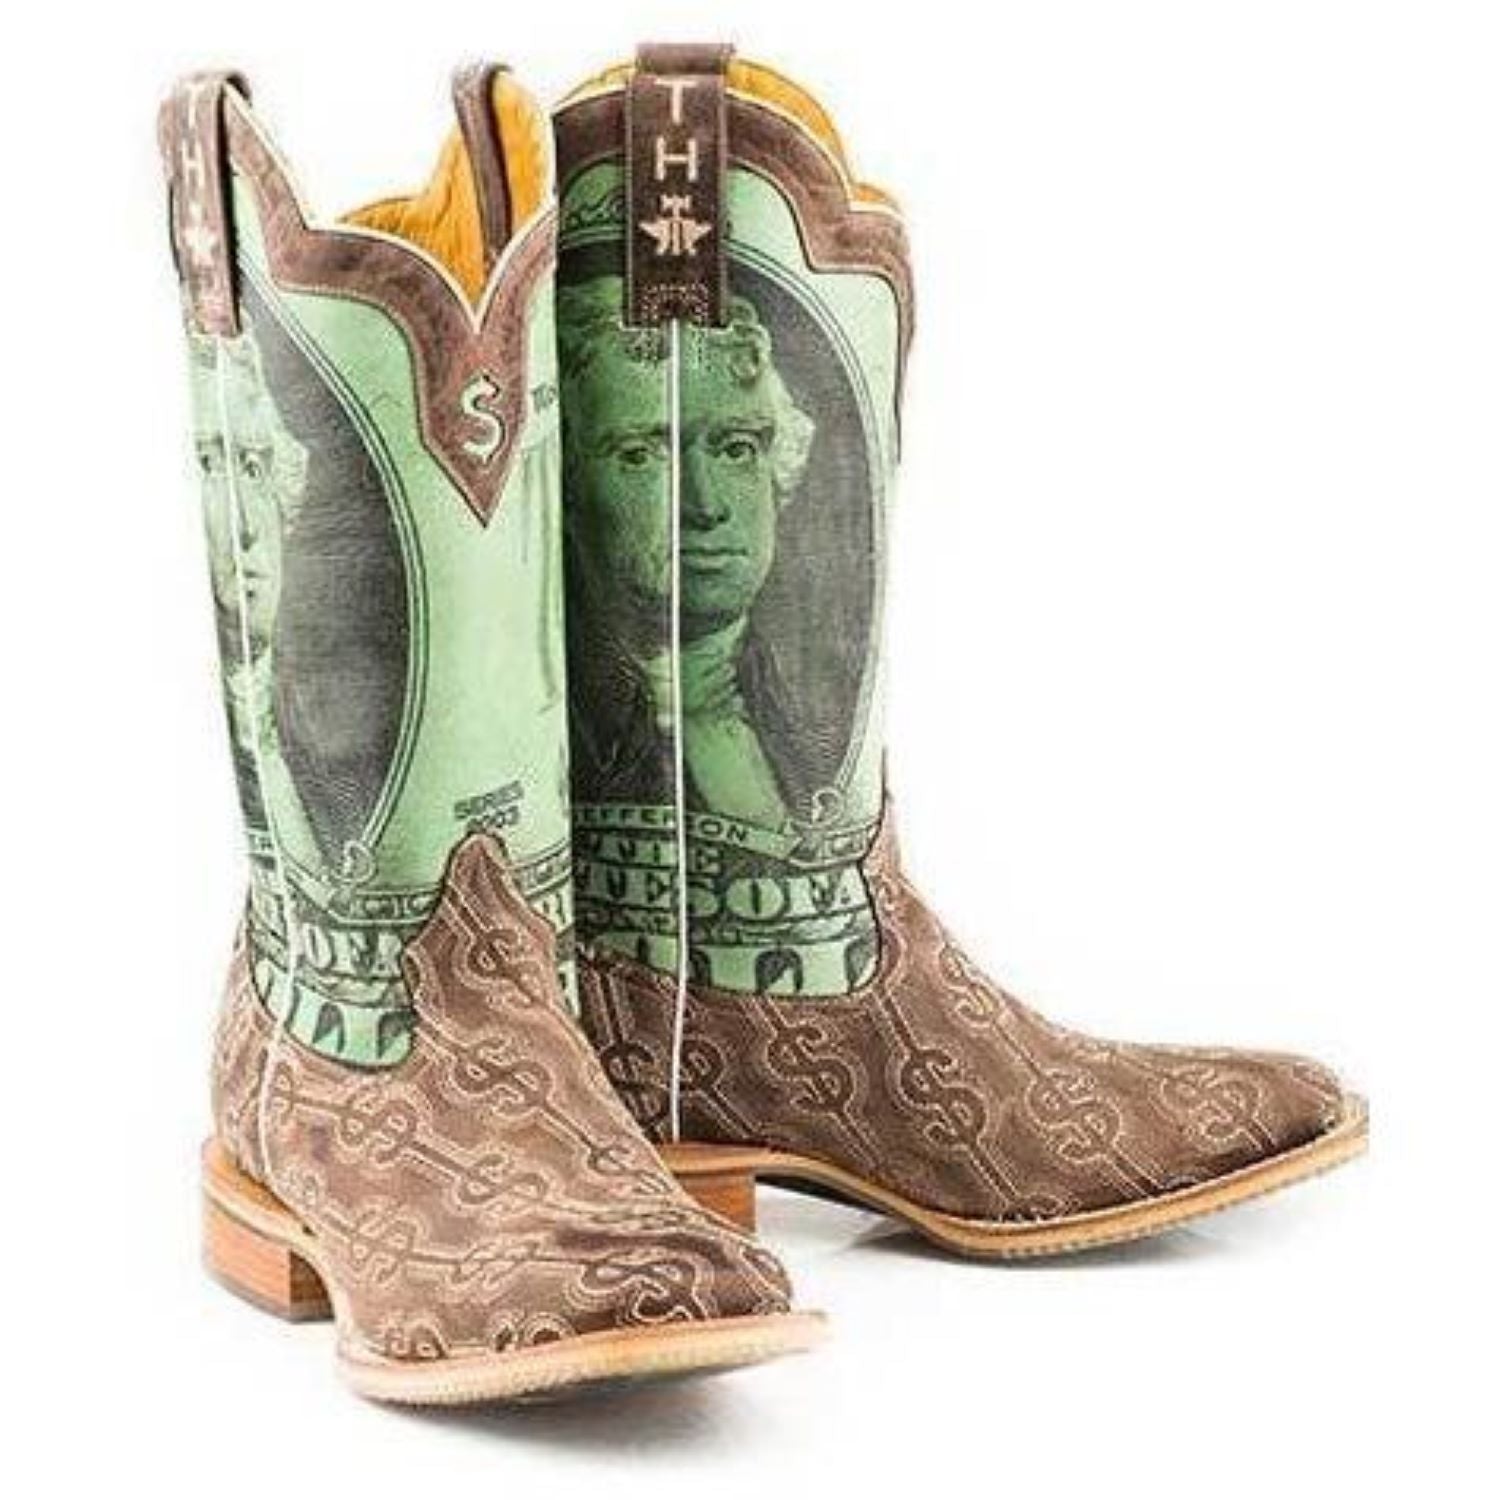 Men's Tin Haul Deuce Boots With Take The Money And Run Sole Handcrafted Brown - yeehawcowboy